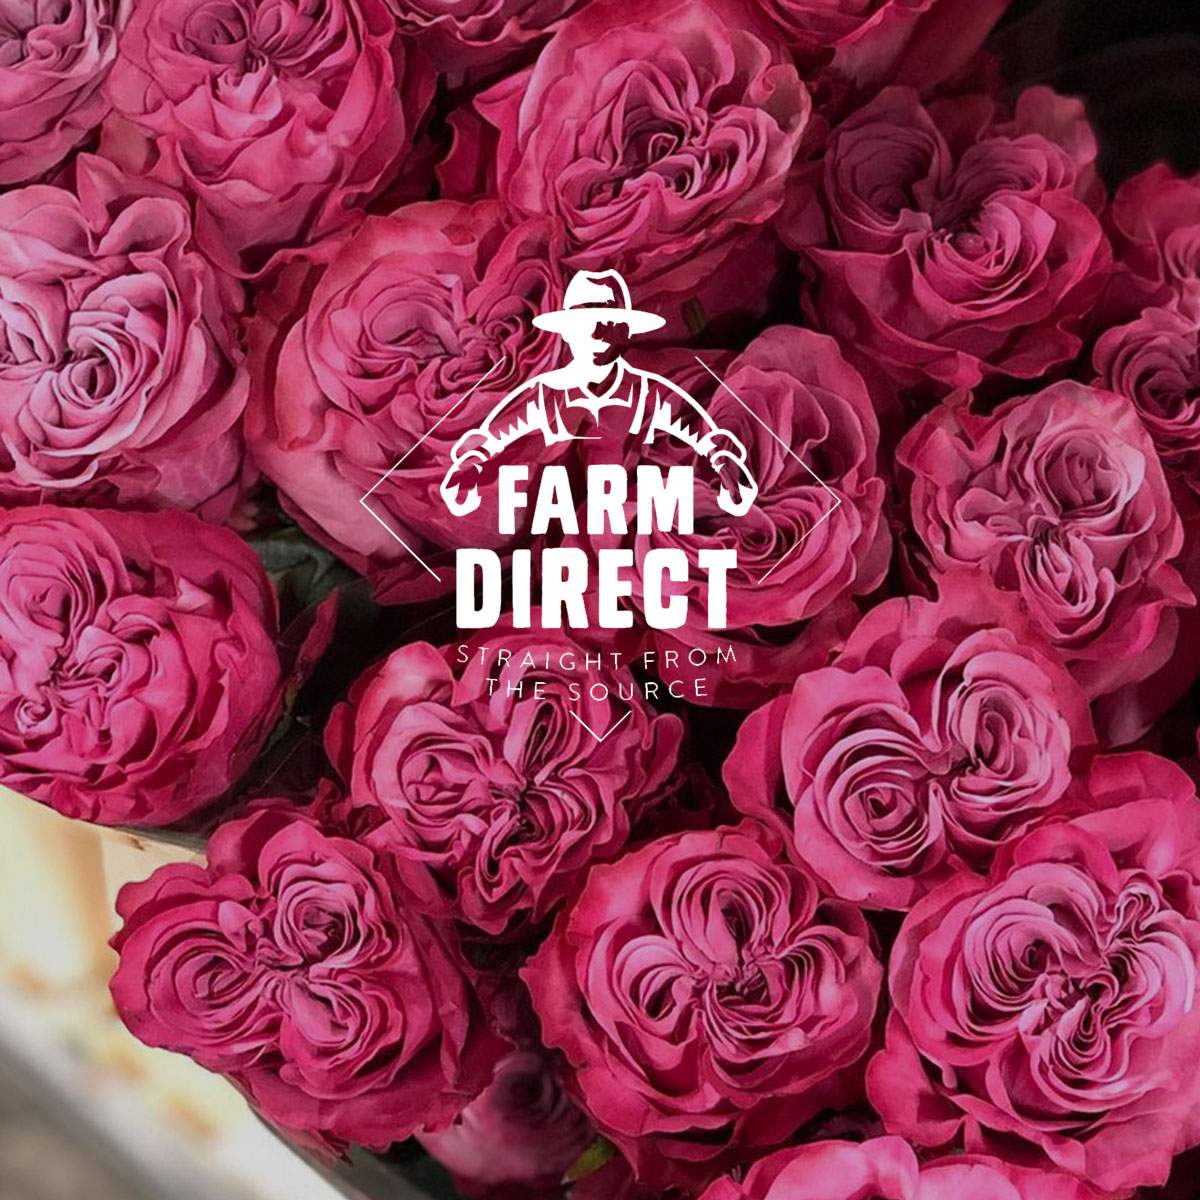 new-rose-by-farm-direct-featured